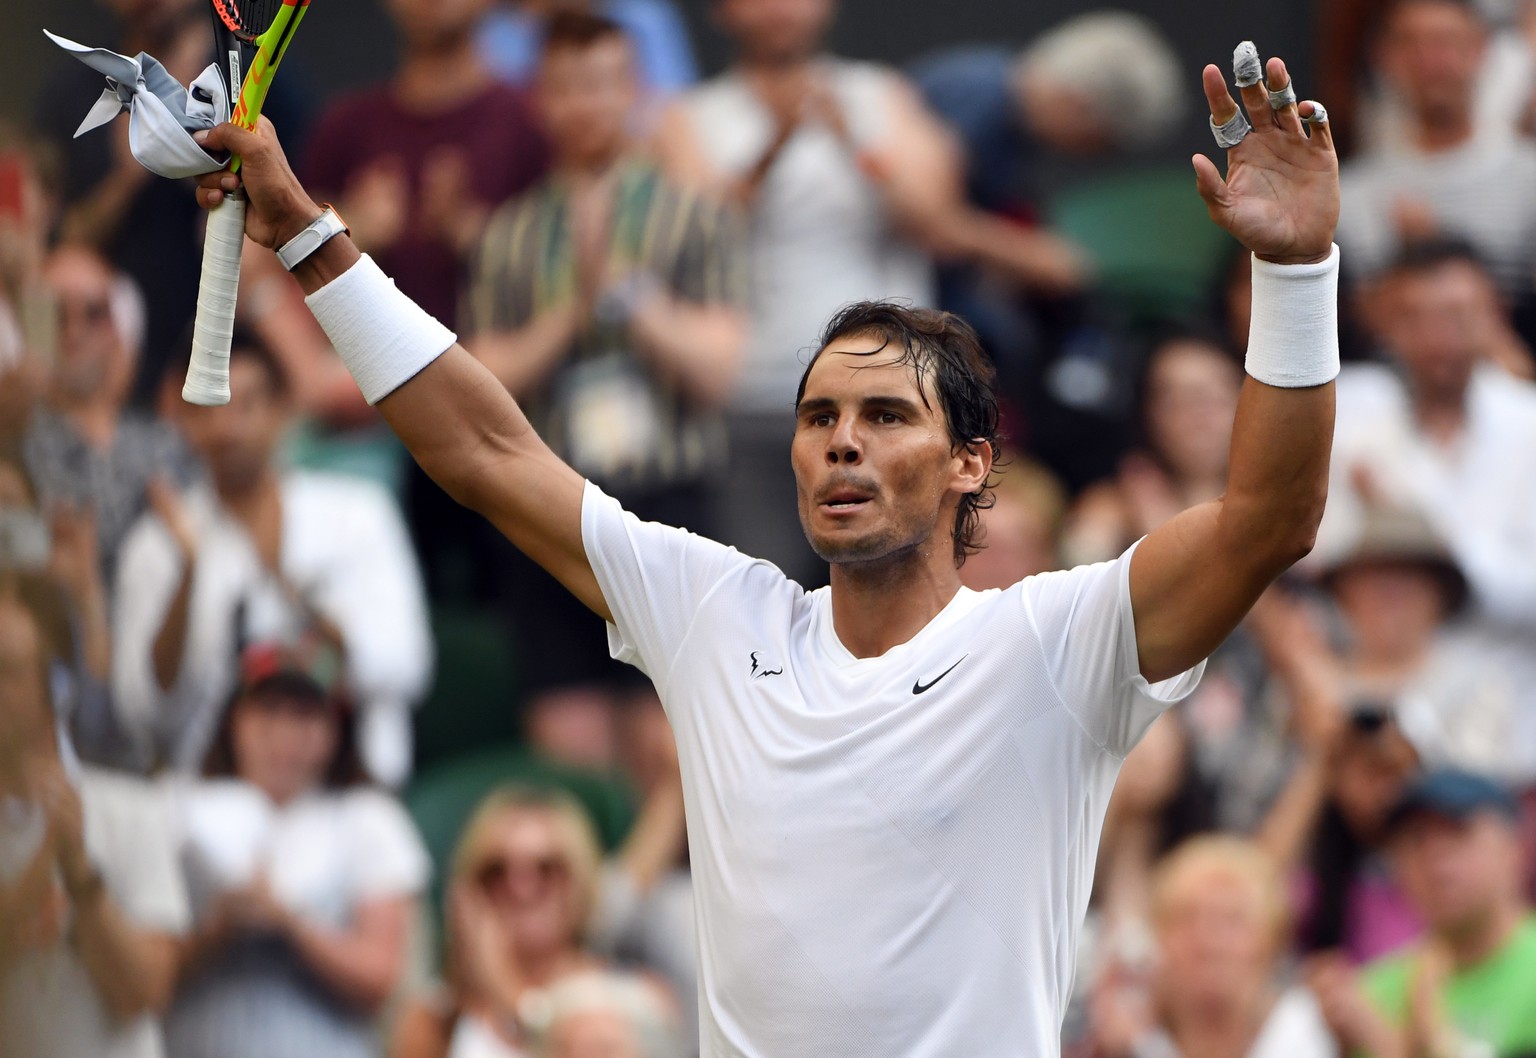 epa07695639 Rafael Nadal of Spain celebrates his win over Nick Kyrgios of Australia in their second round match during the Wimbledon Championships at the All England Lawn Tennis Club, in London, Brita ...